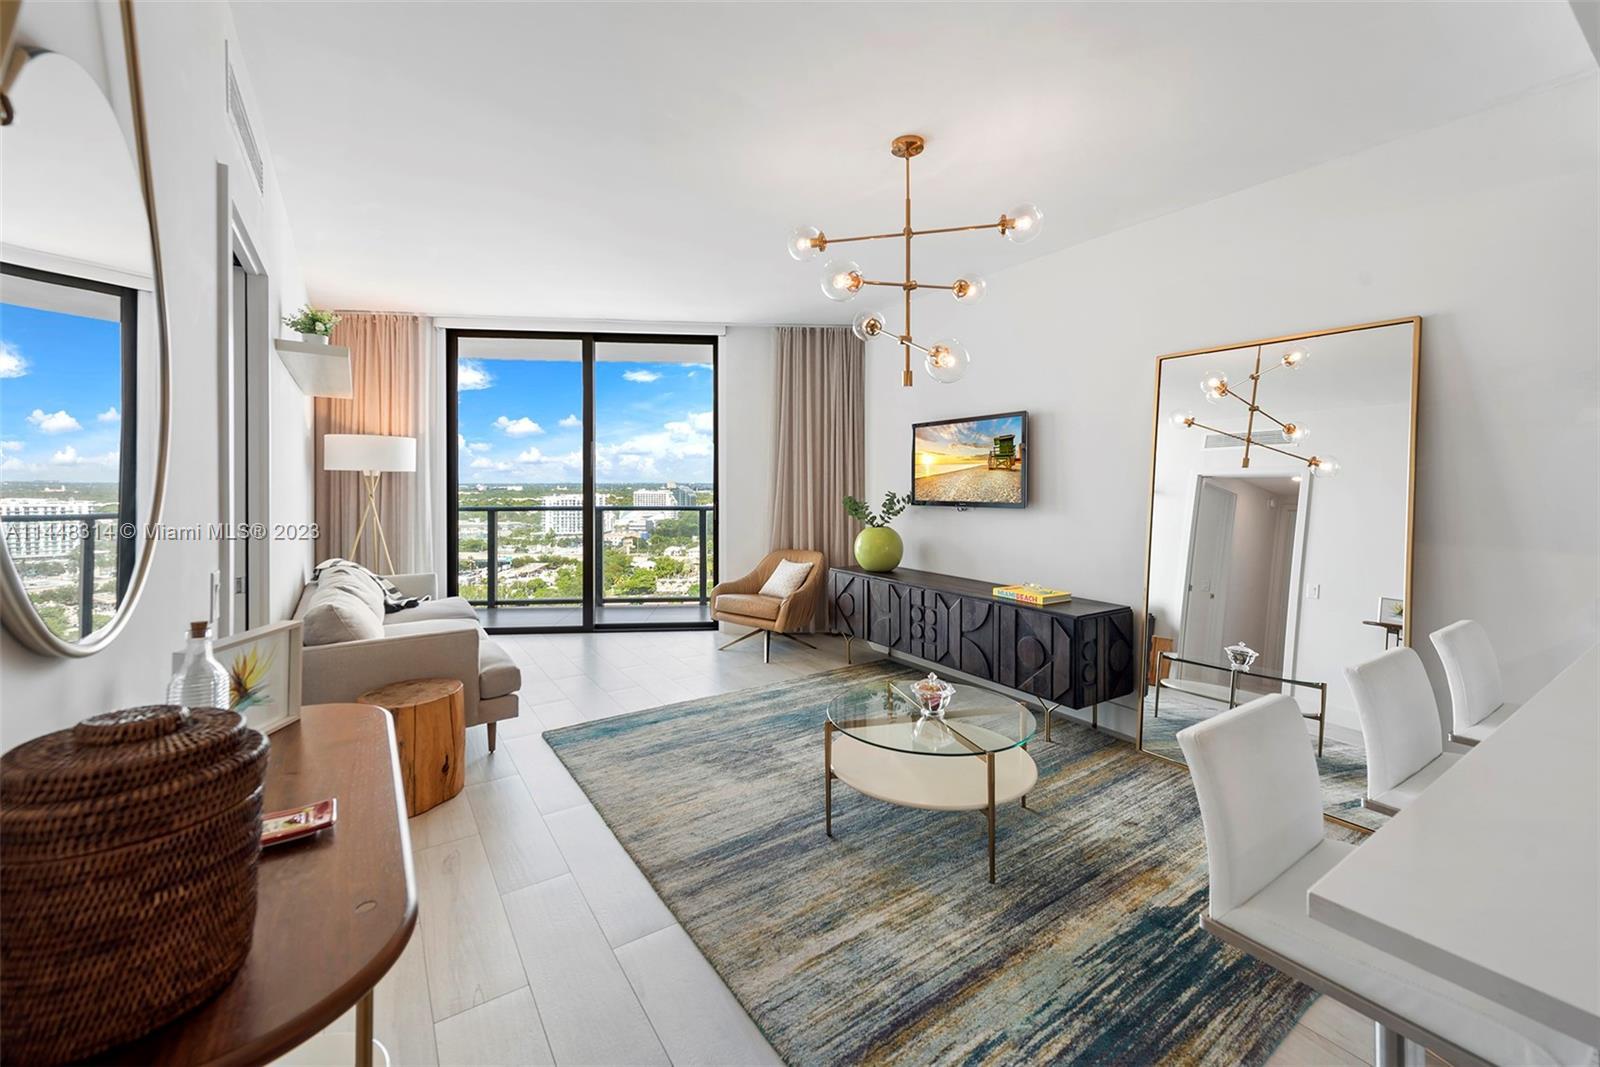 Tastefully designed & furnished 2 bed/2 bath unit on the 20th floor of Paraiso Bayviews in Edgewater